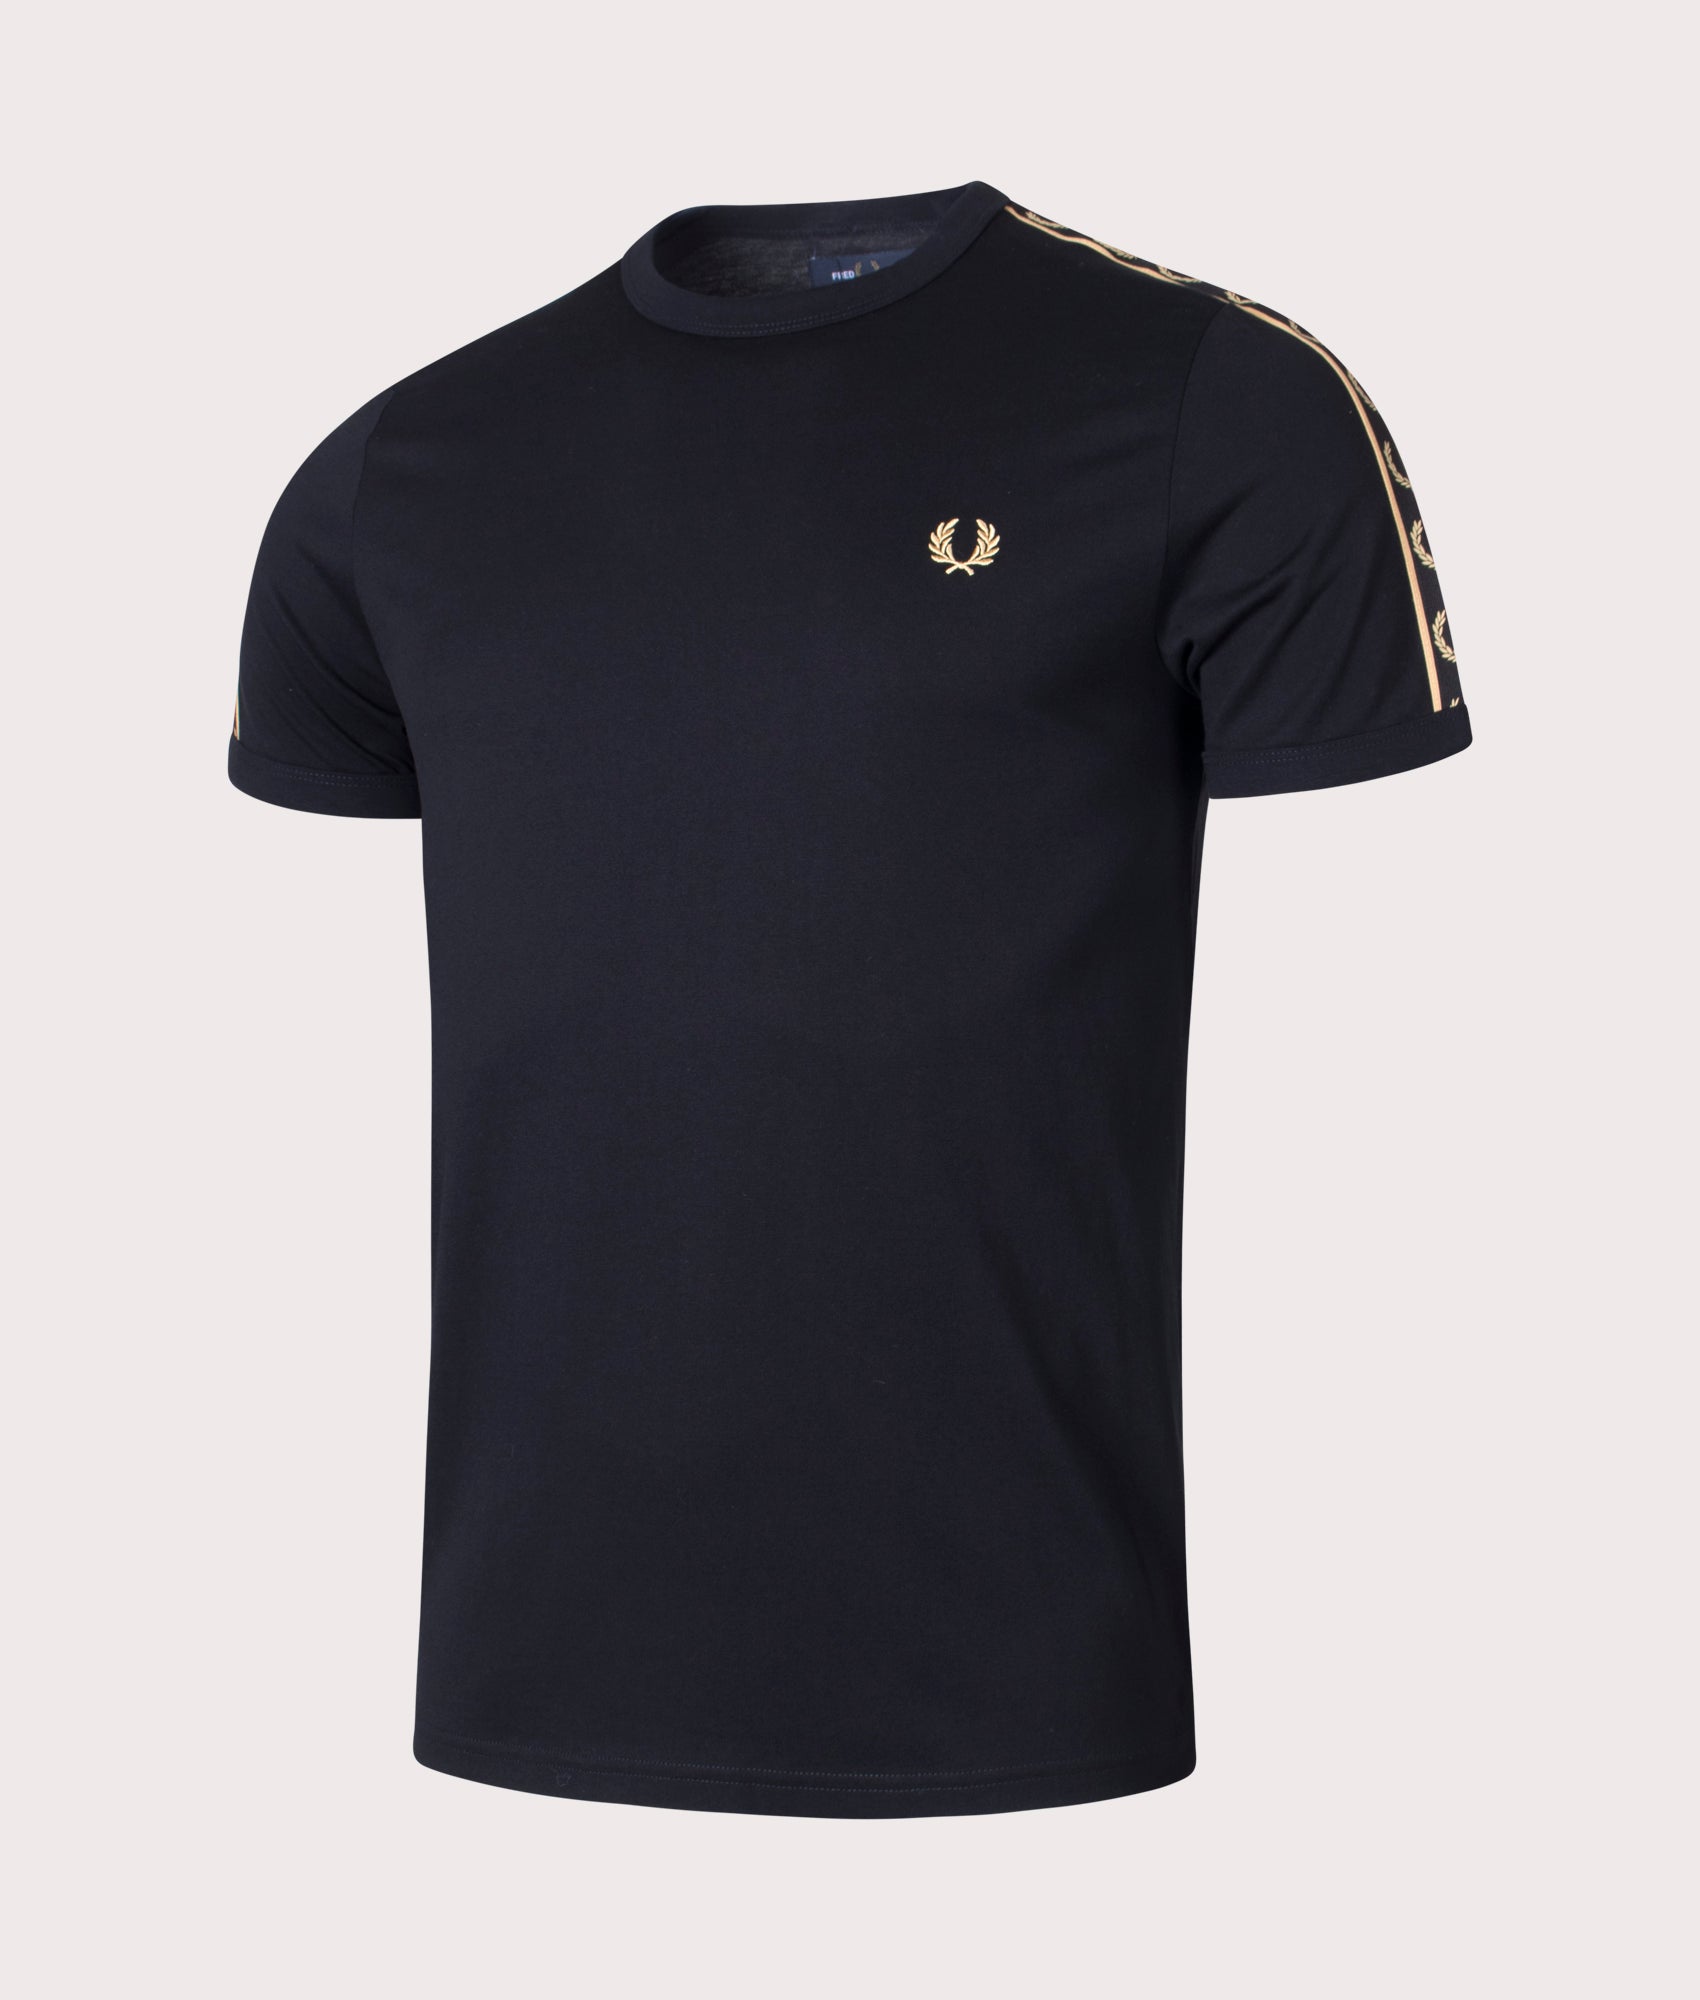 Contrast Tape Ringer T-Shirt Black | Fred Perry | EQVVS